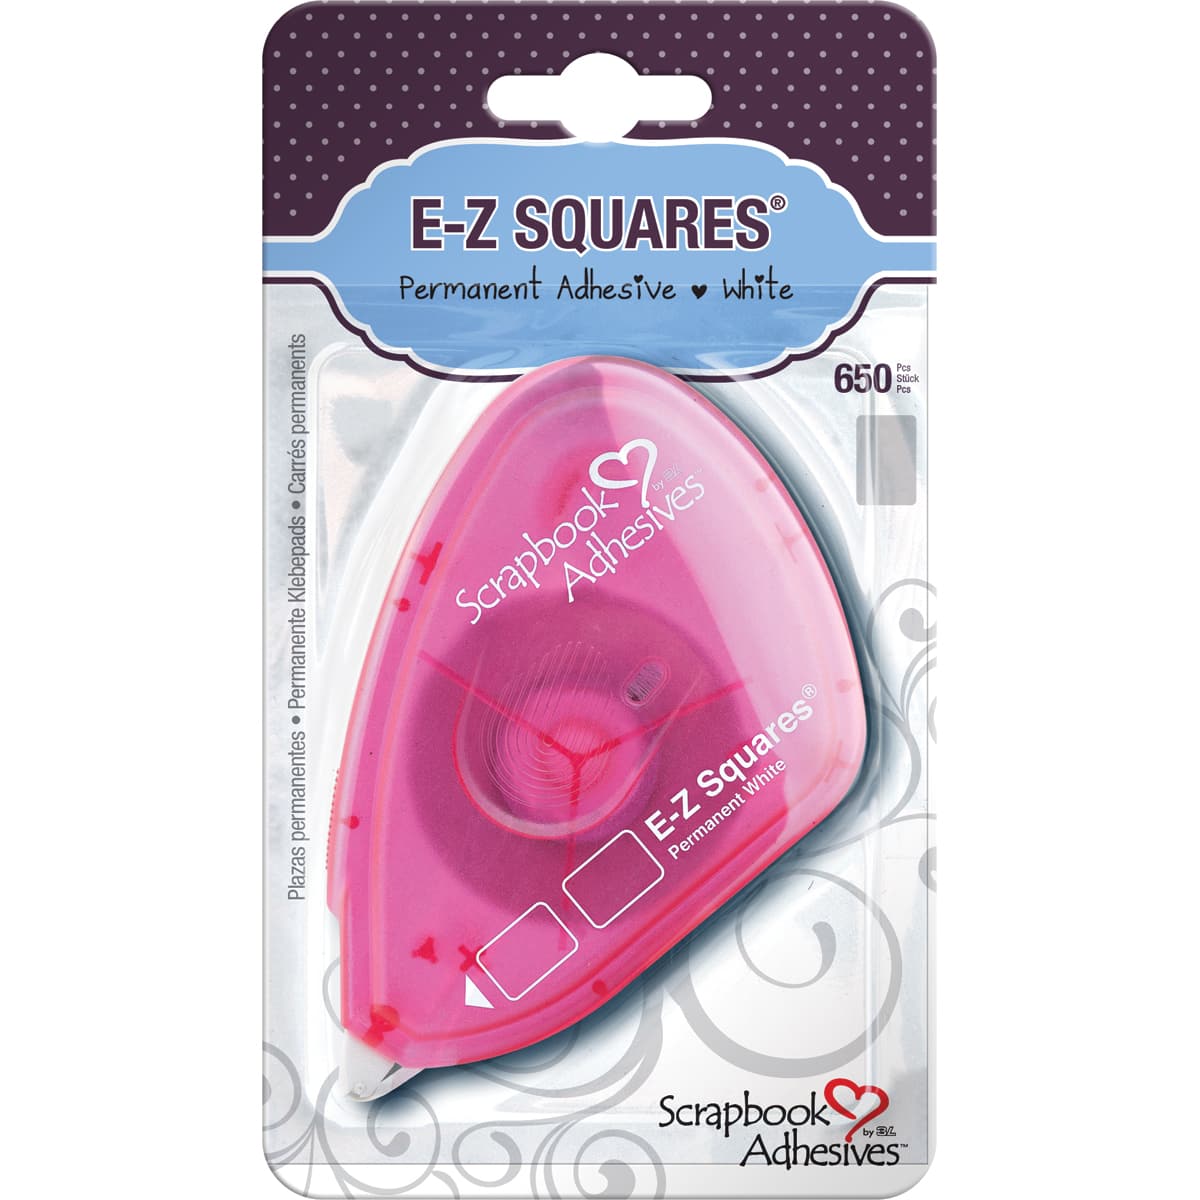 Scrapbook Adhesives by 3L® E-Z Squares® Permanent Adhesive Tabs